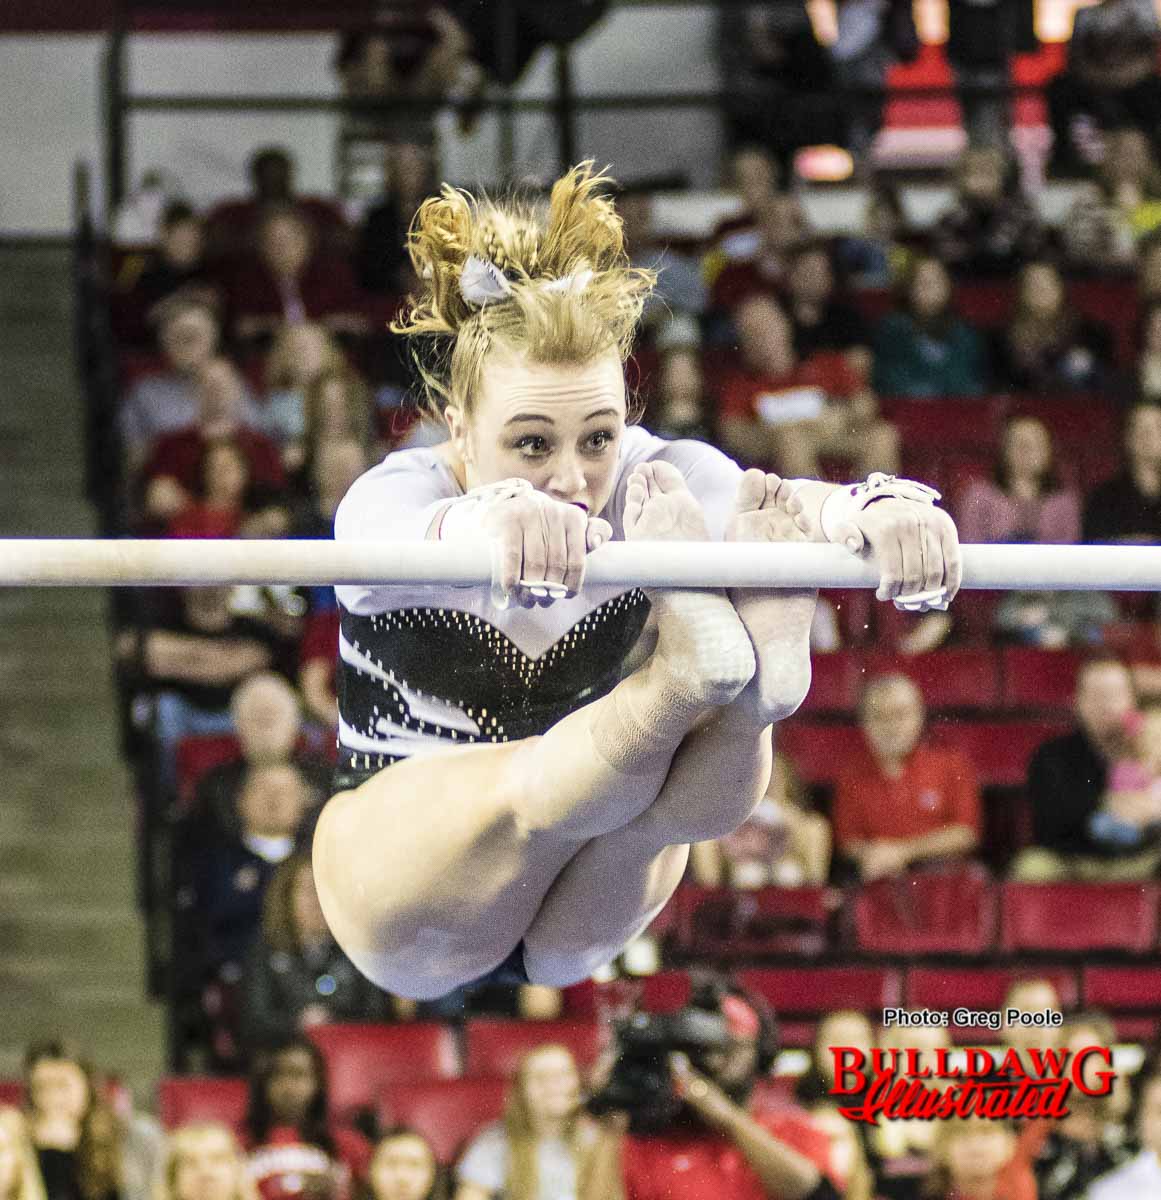 Hayley Sanders eyes the other bar during her routine.